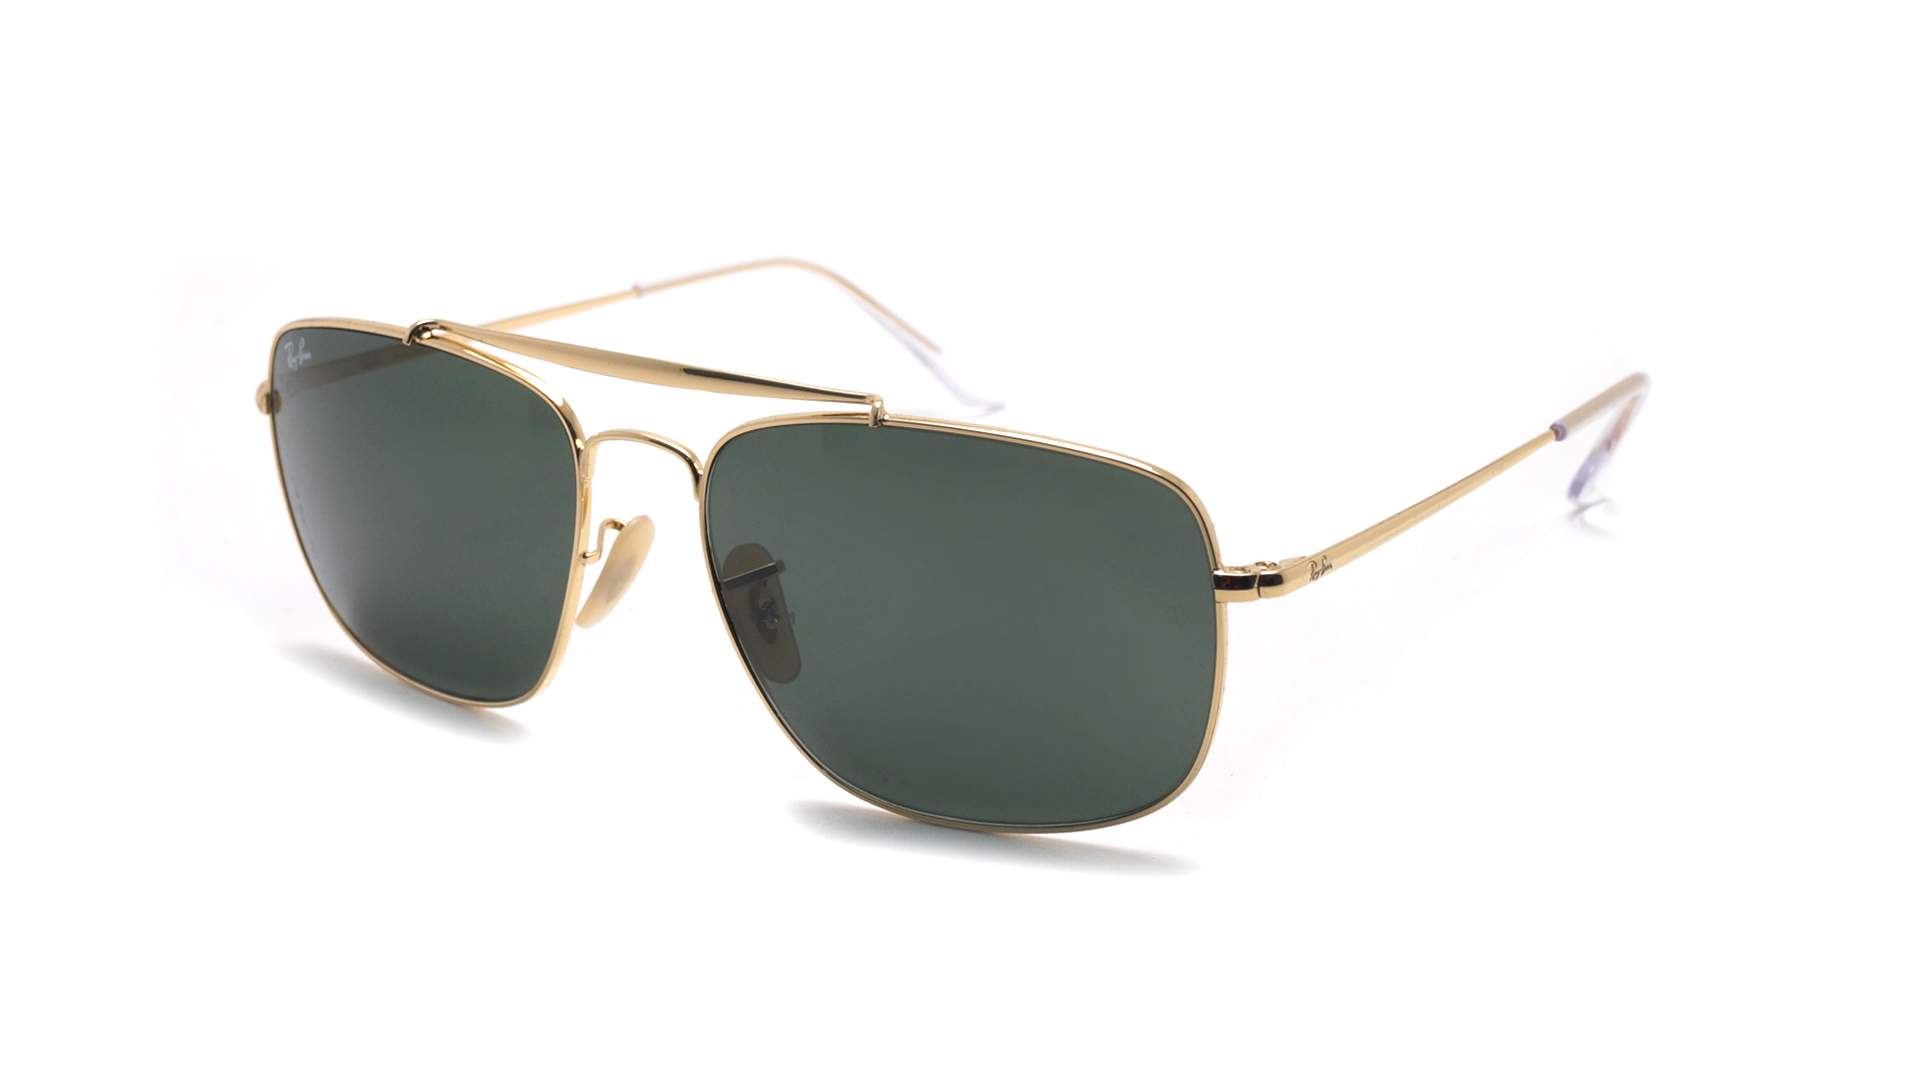 ray ban the colonel rb3560